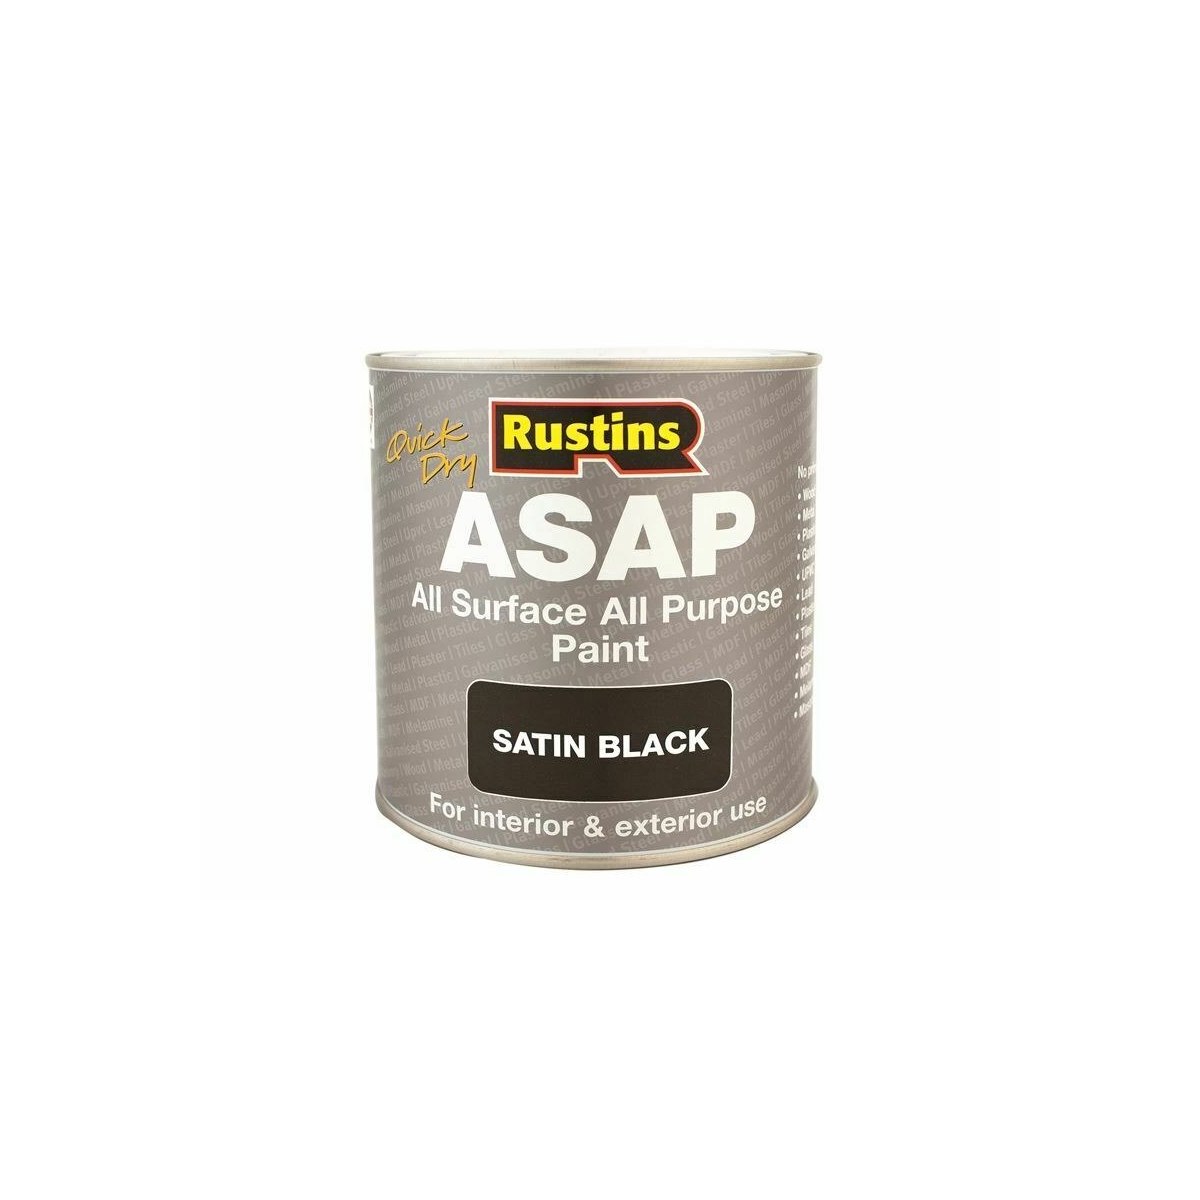 Rustins Quick Dry All Surface All Purpose Paint (ASAP) Black 250ml